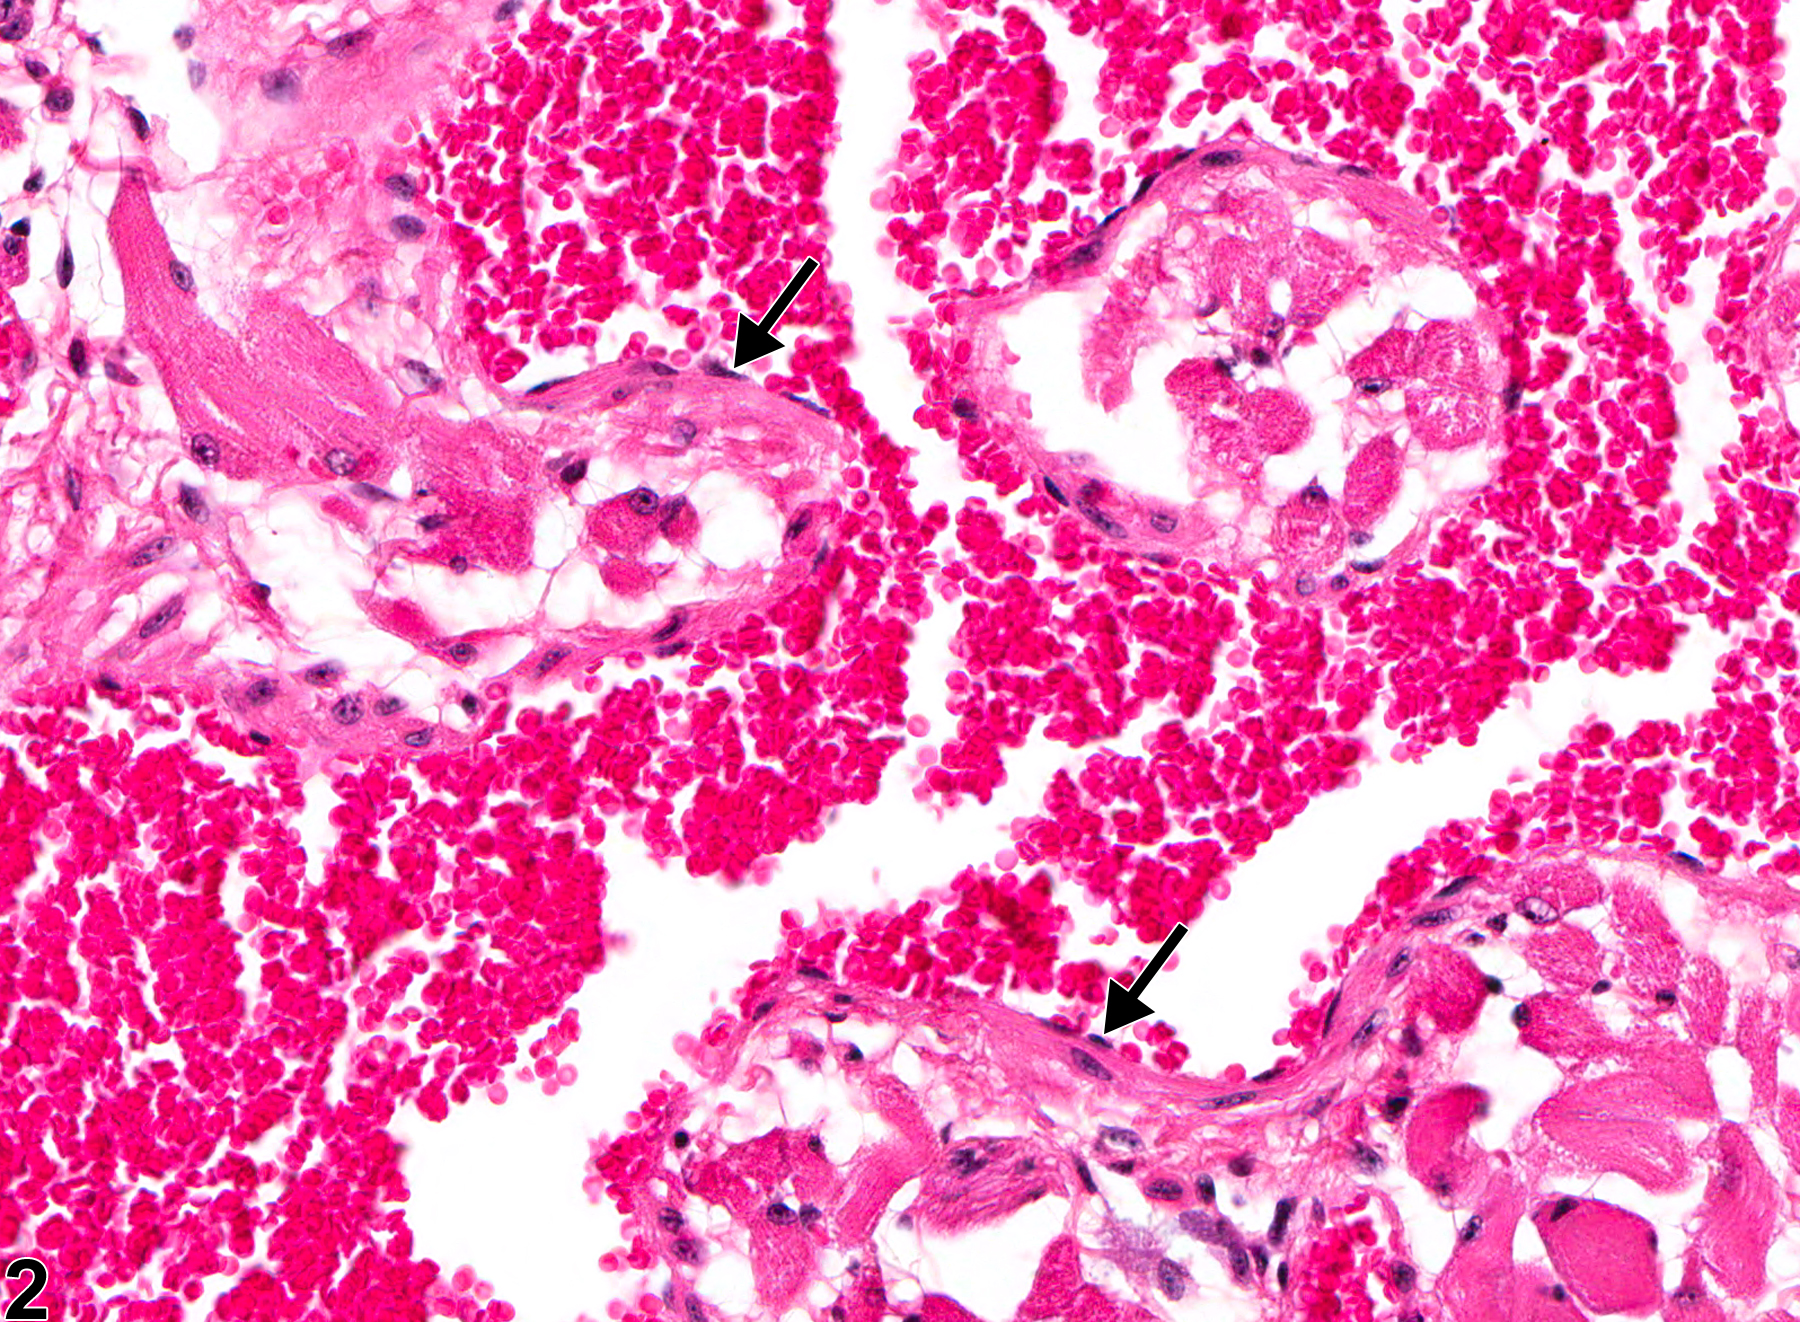 Image of angiectasis in the tongue from a female B6C3F1 mouse in a chronic study